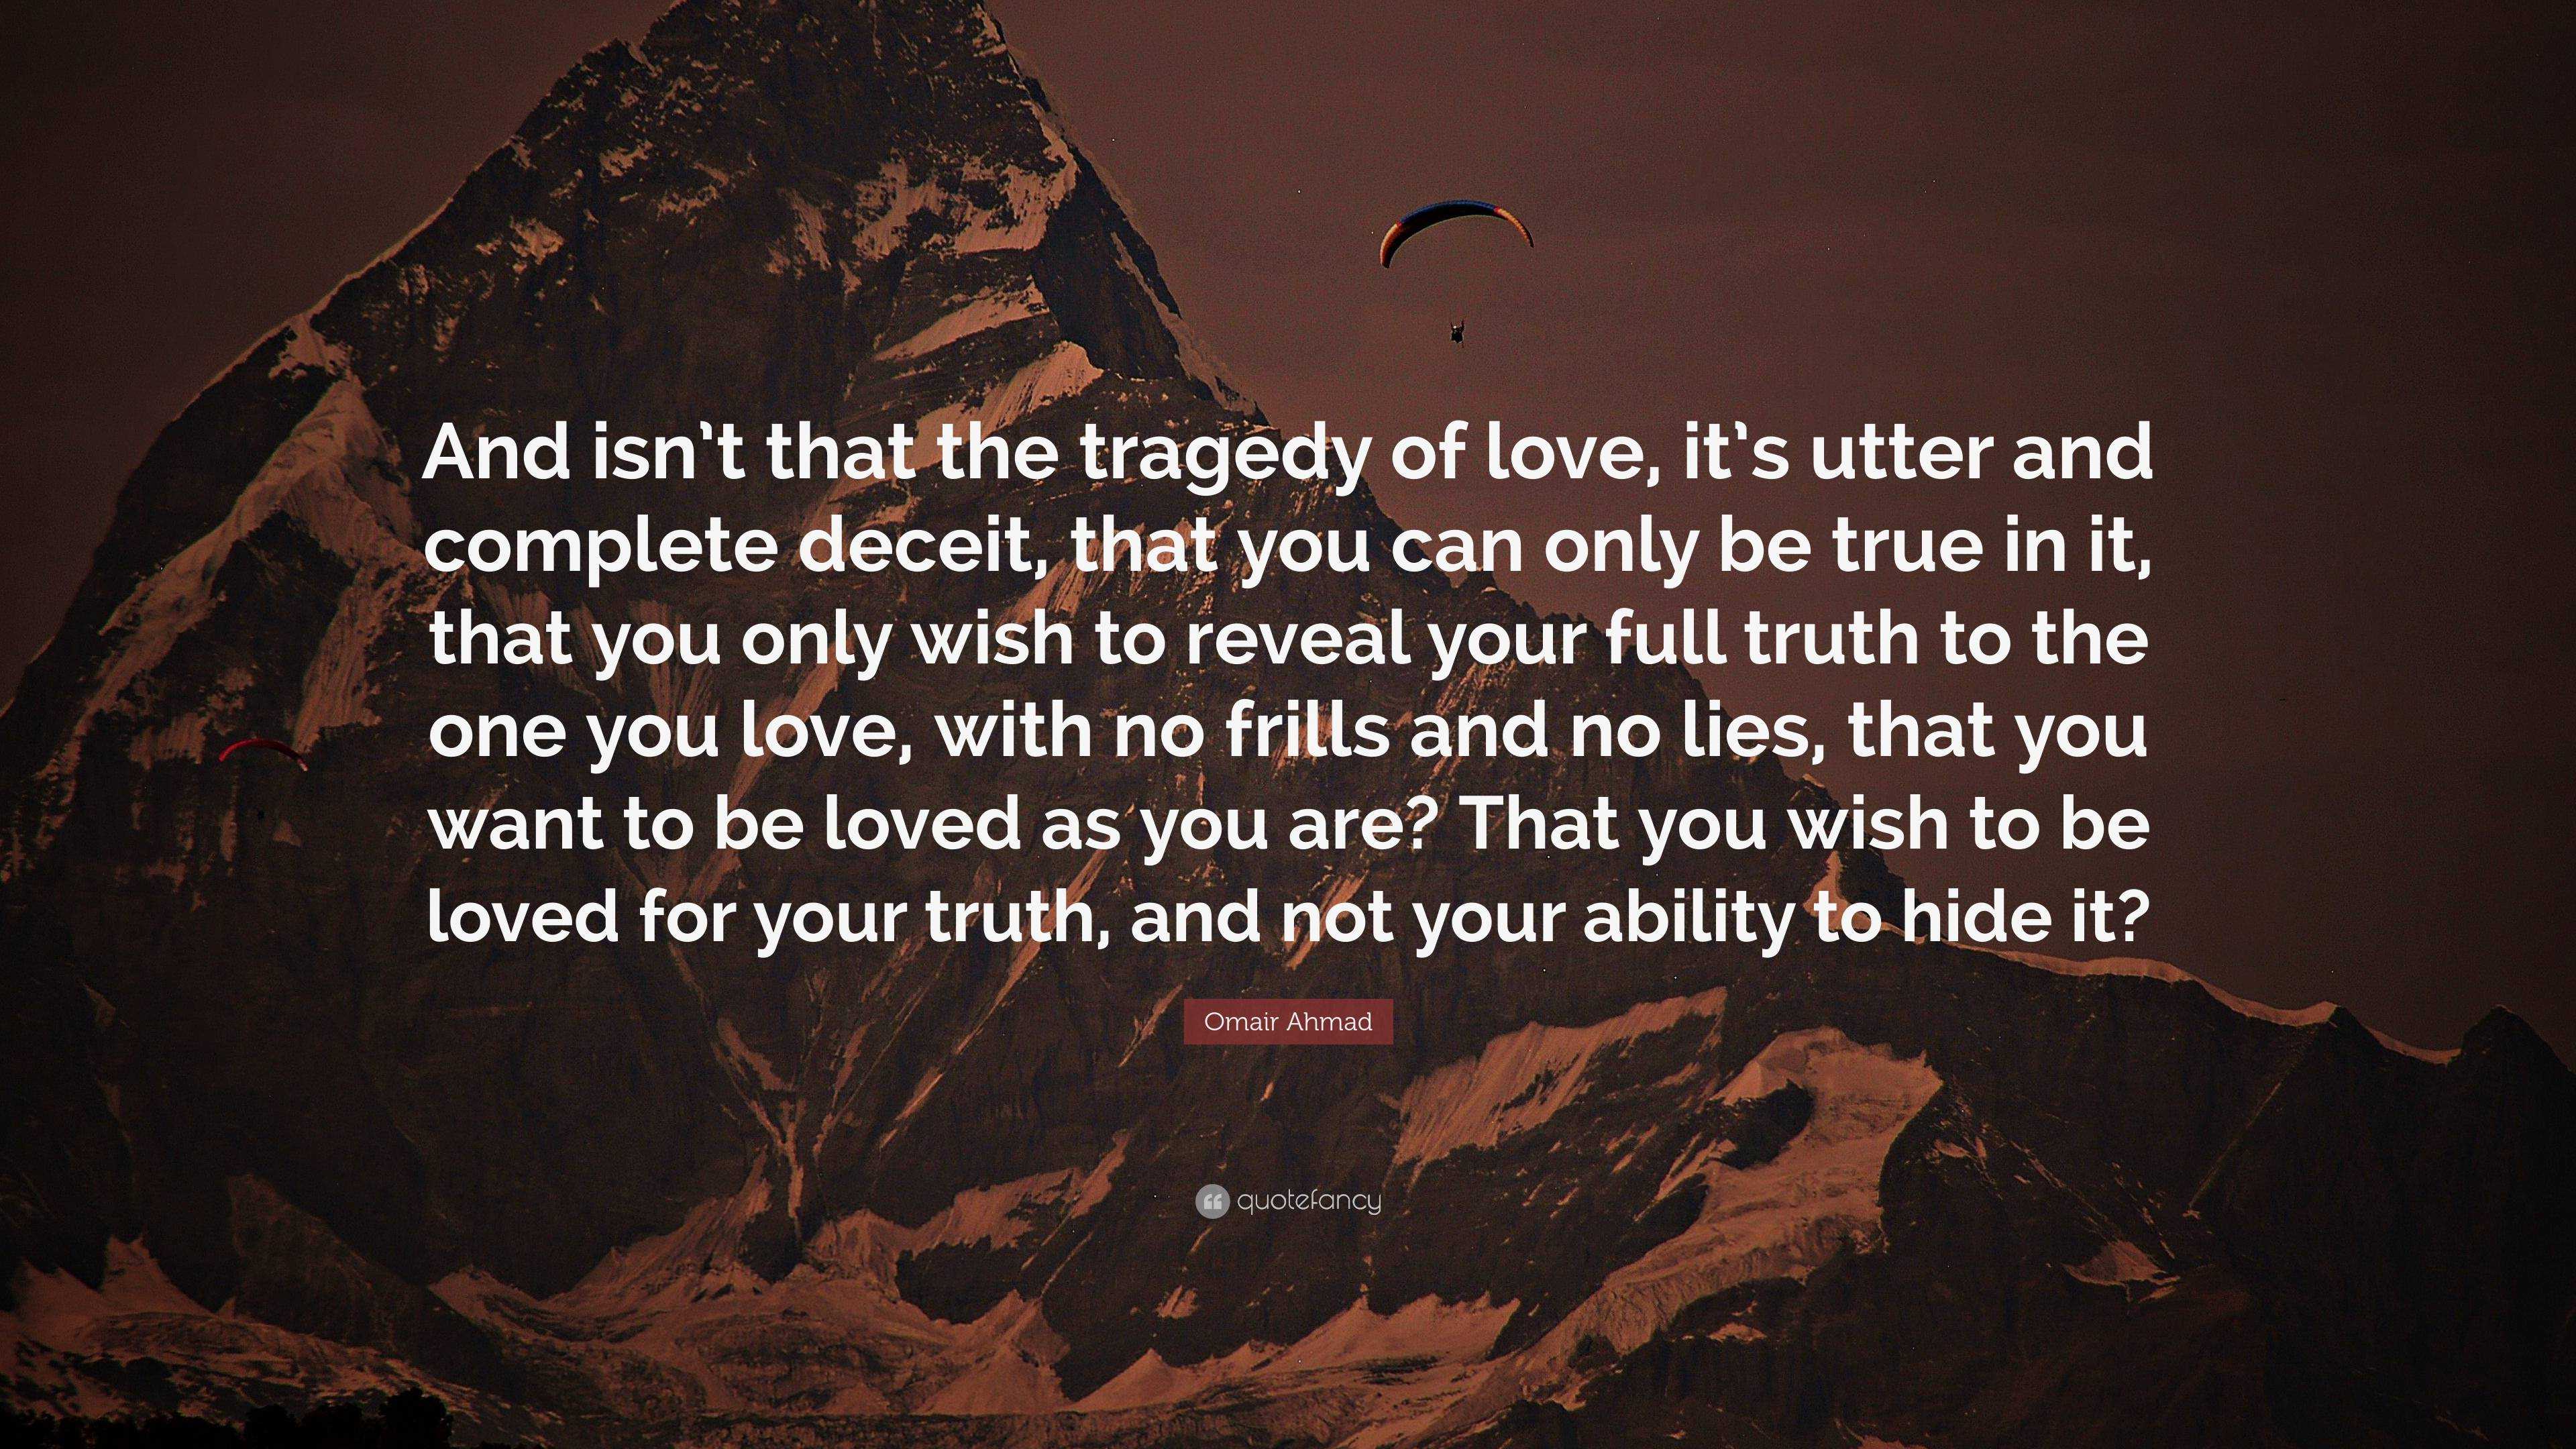 Omair Ahmad Quote: “And isn't that the tragedy of love, it's utter and  complete deceit, that you can only be true in it, that you only wish ...”